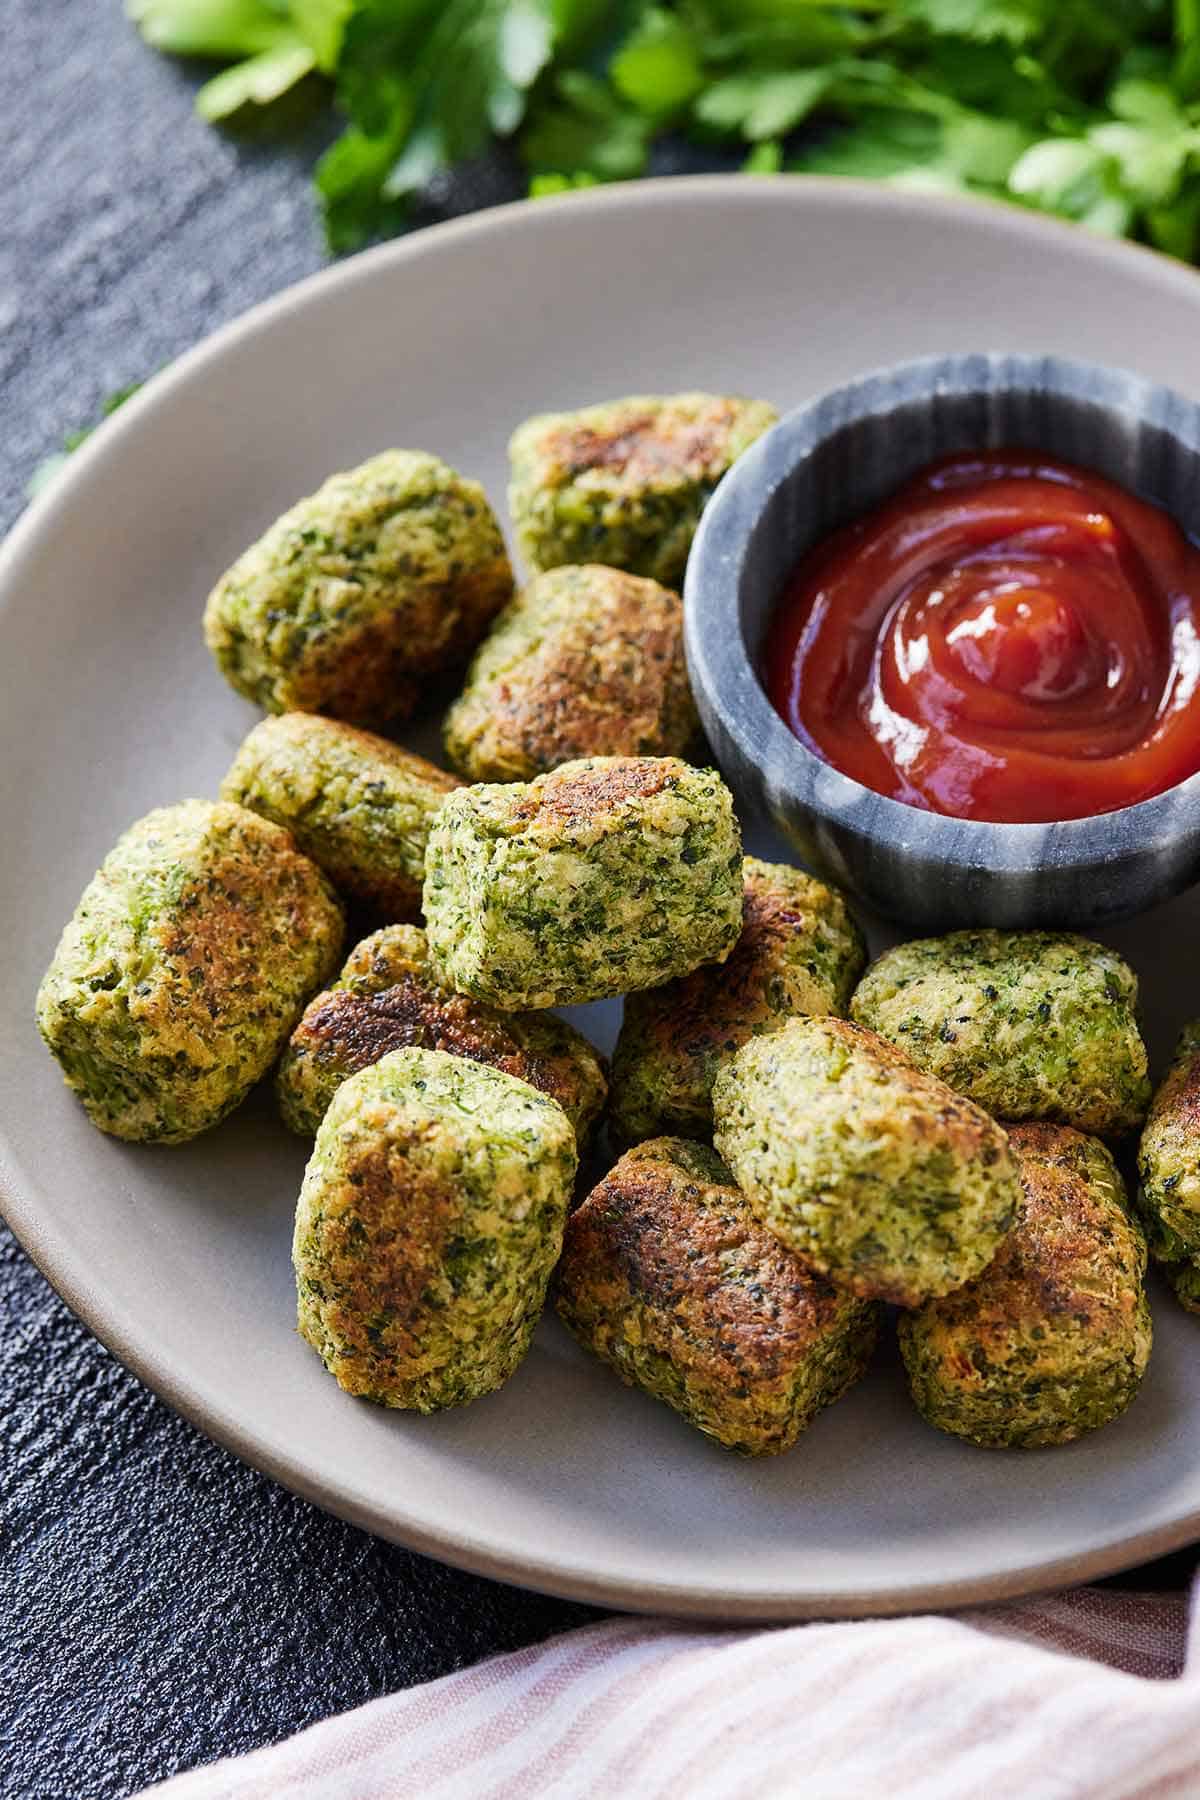 Broccoli tots in a plate with ketchup beside it.